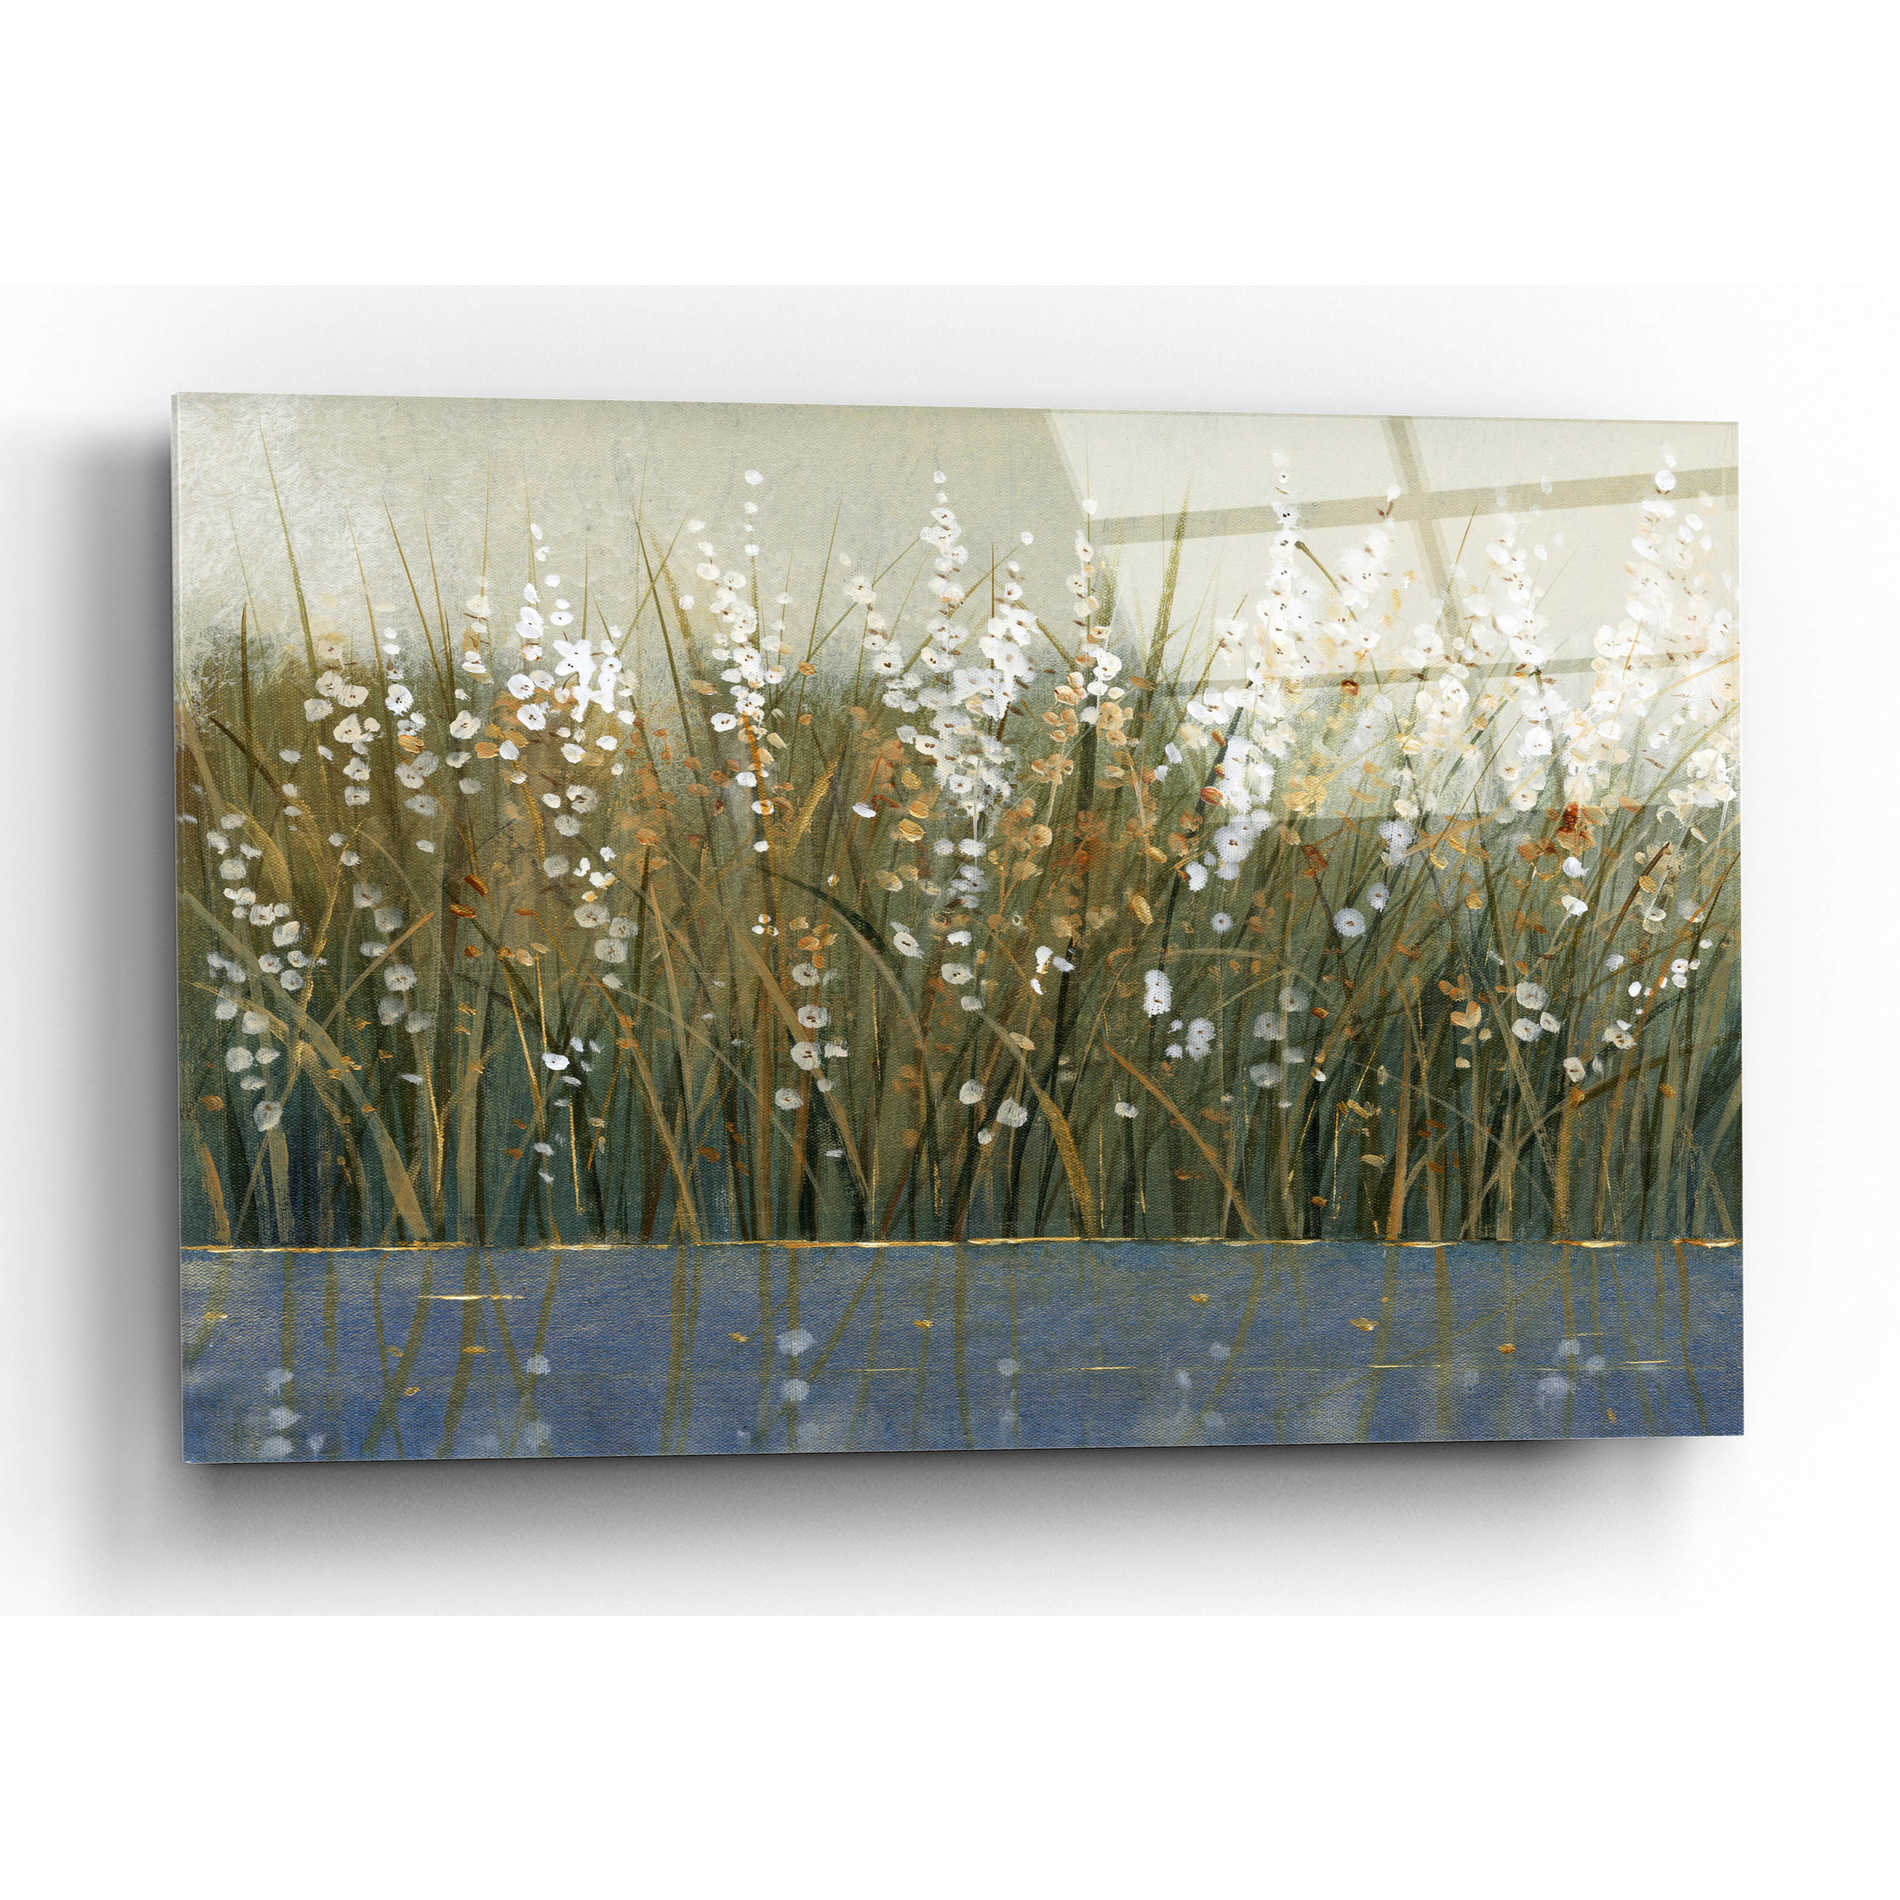 Epic Art 'By the Tall Grass II' by Tim O'Toole, Acrylic Glass Wall Art,16x12